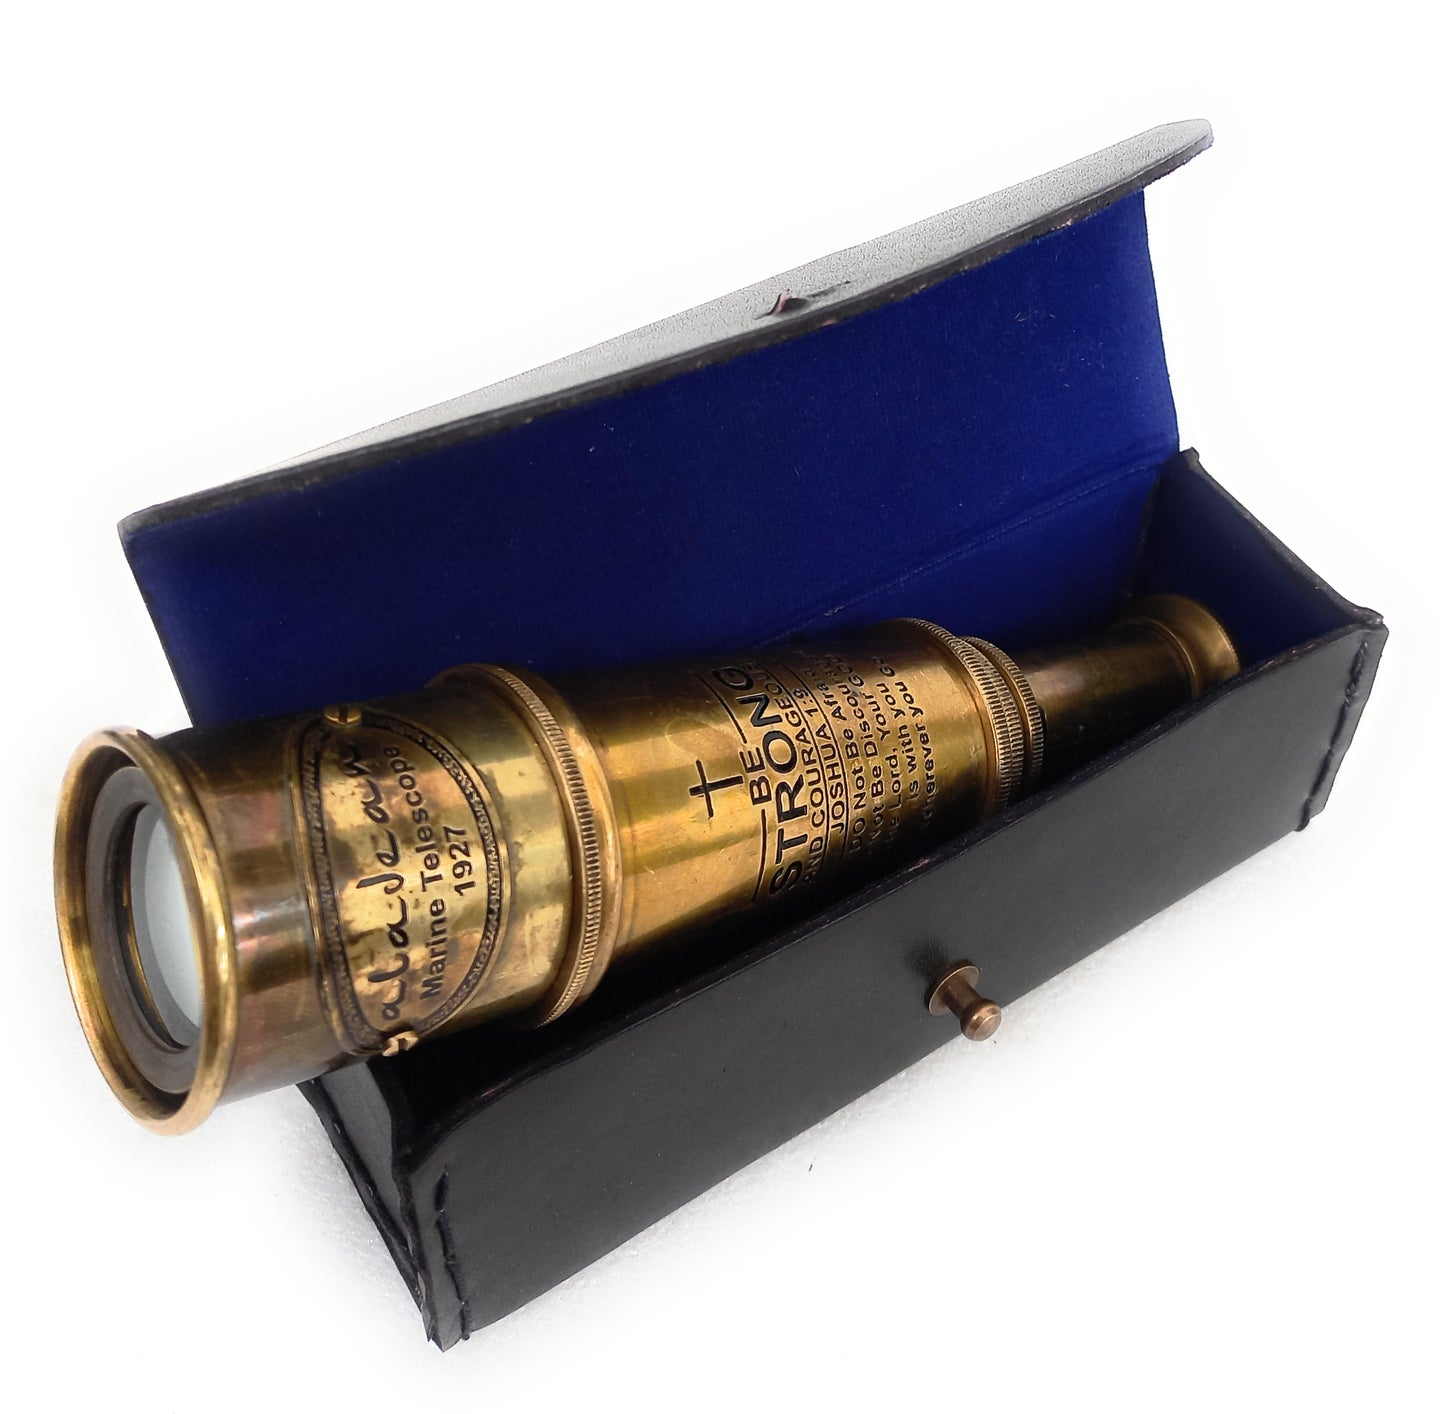 Vintage Spyglass Telescope Engraved  "Be Strong & Courageous" Quote